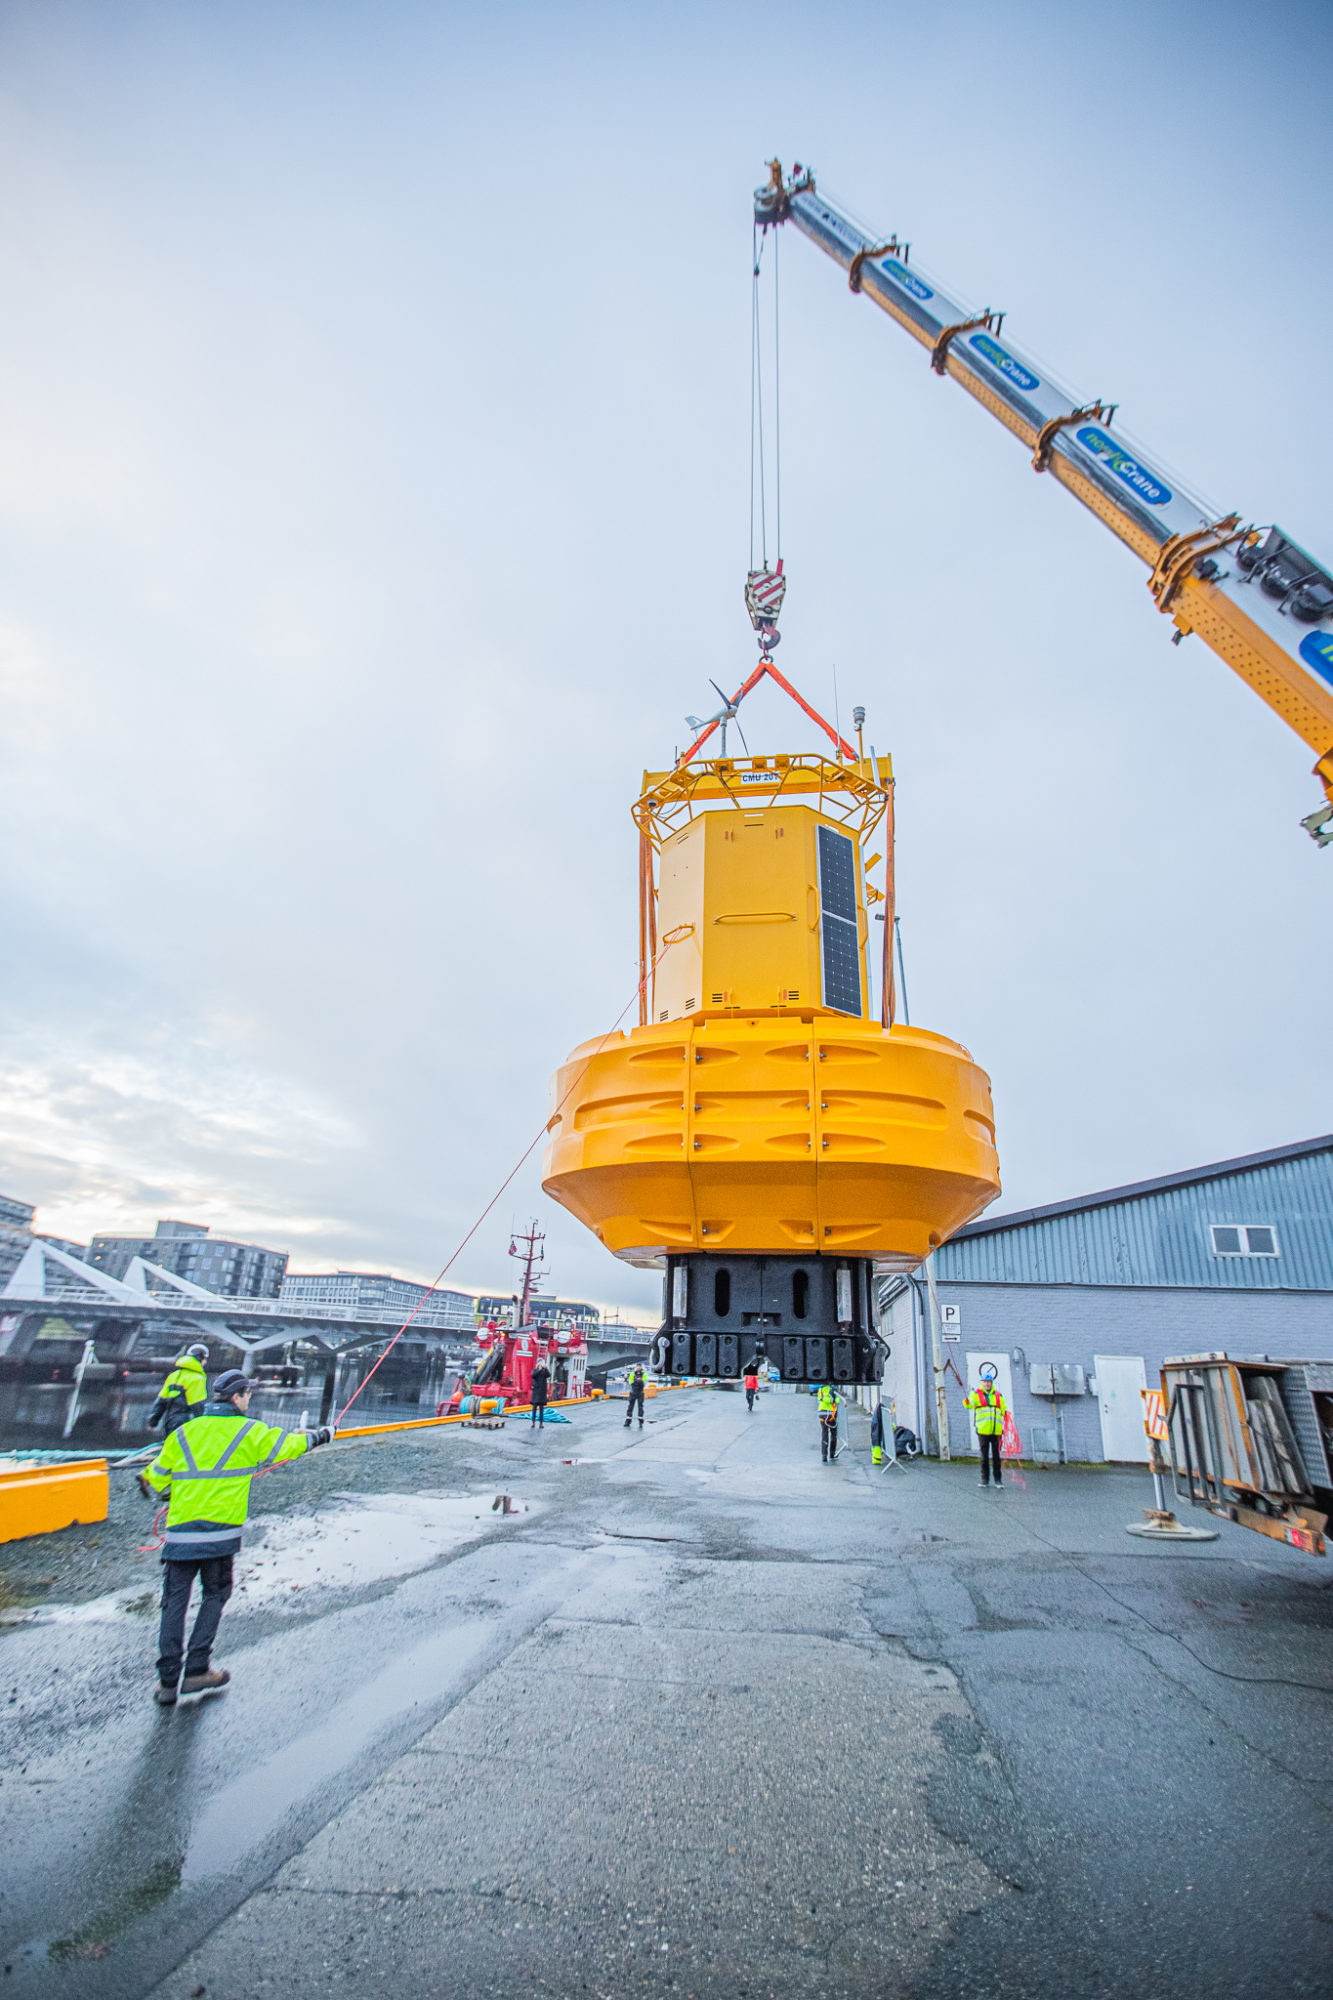 One of the research buoys is being loaded onto the tugboat